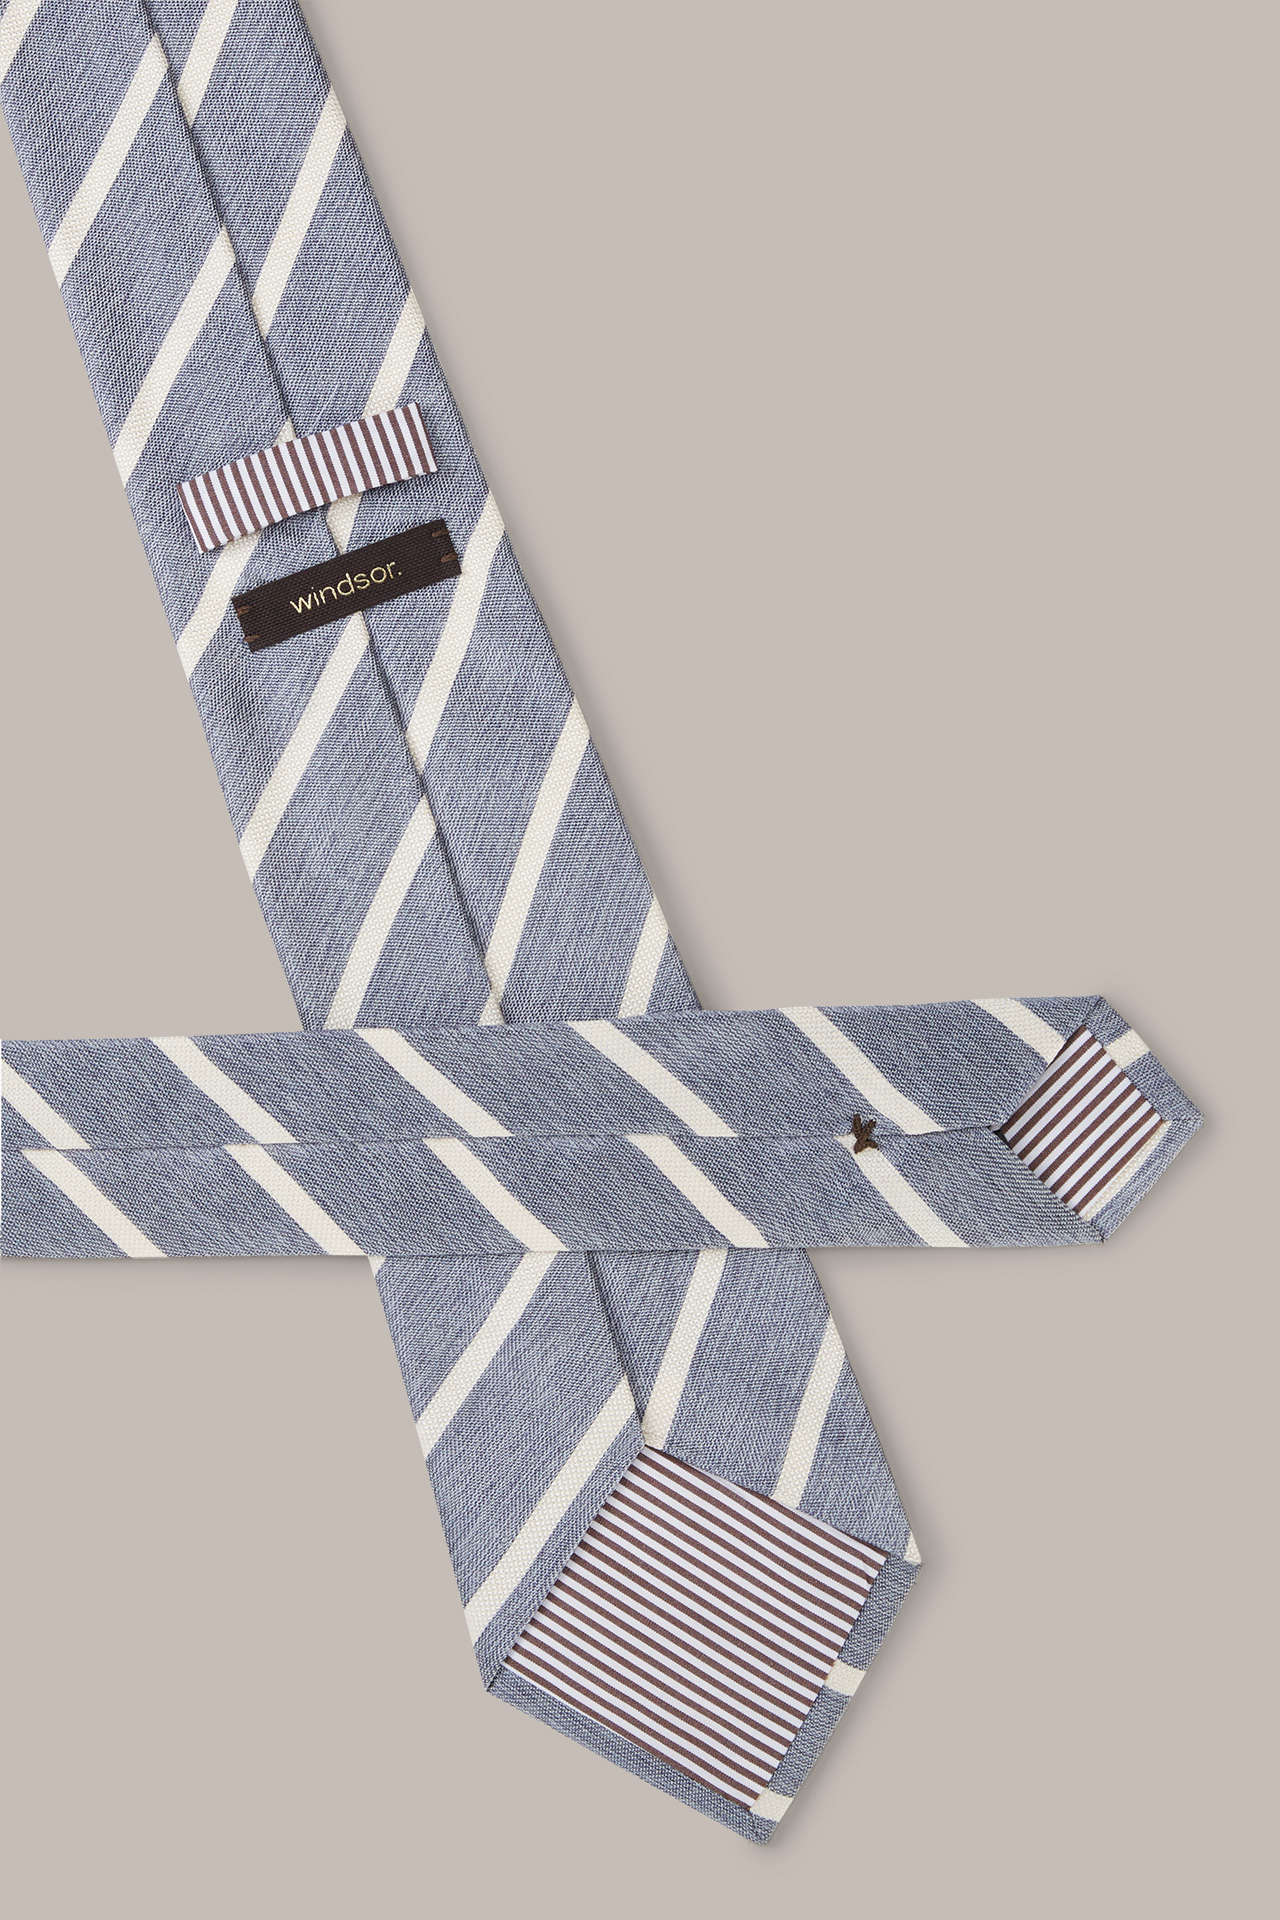 Cotton Tie with Silk in Blue and White Striped